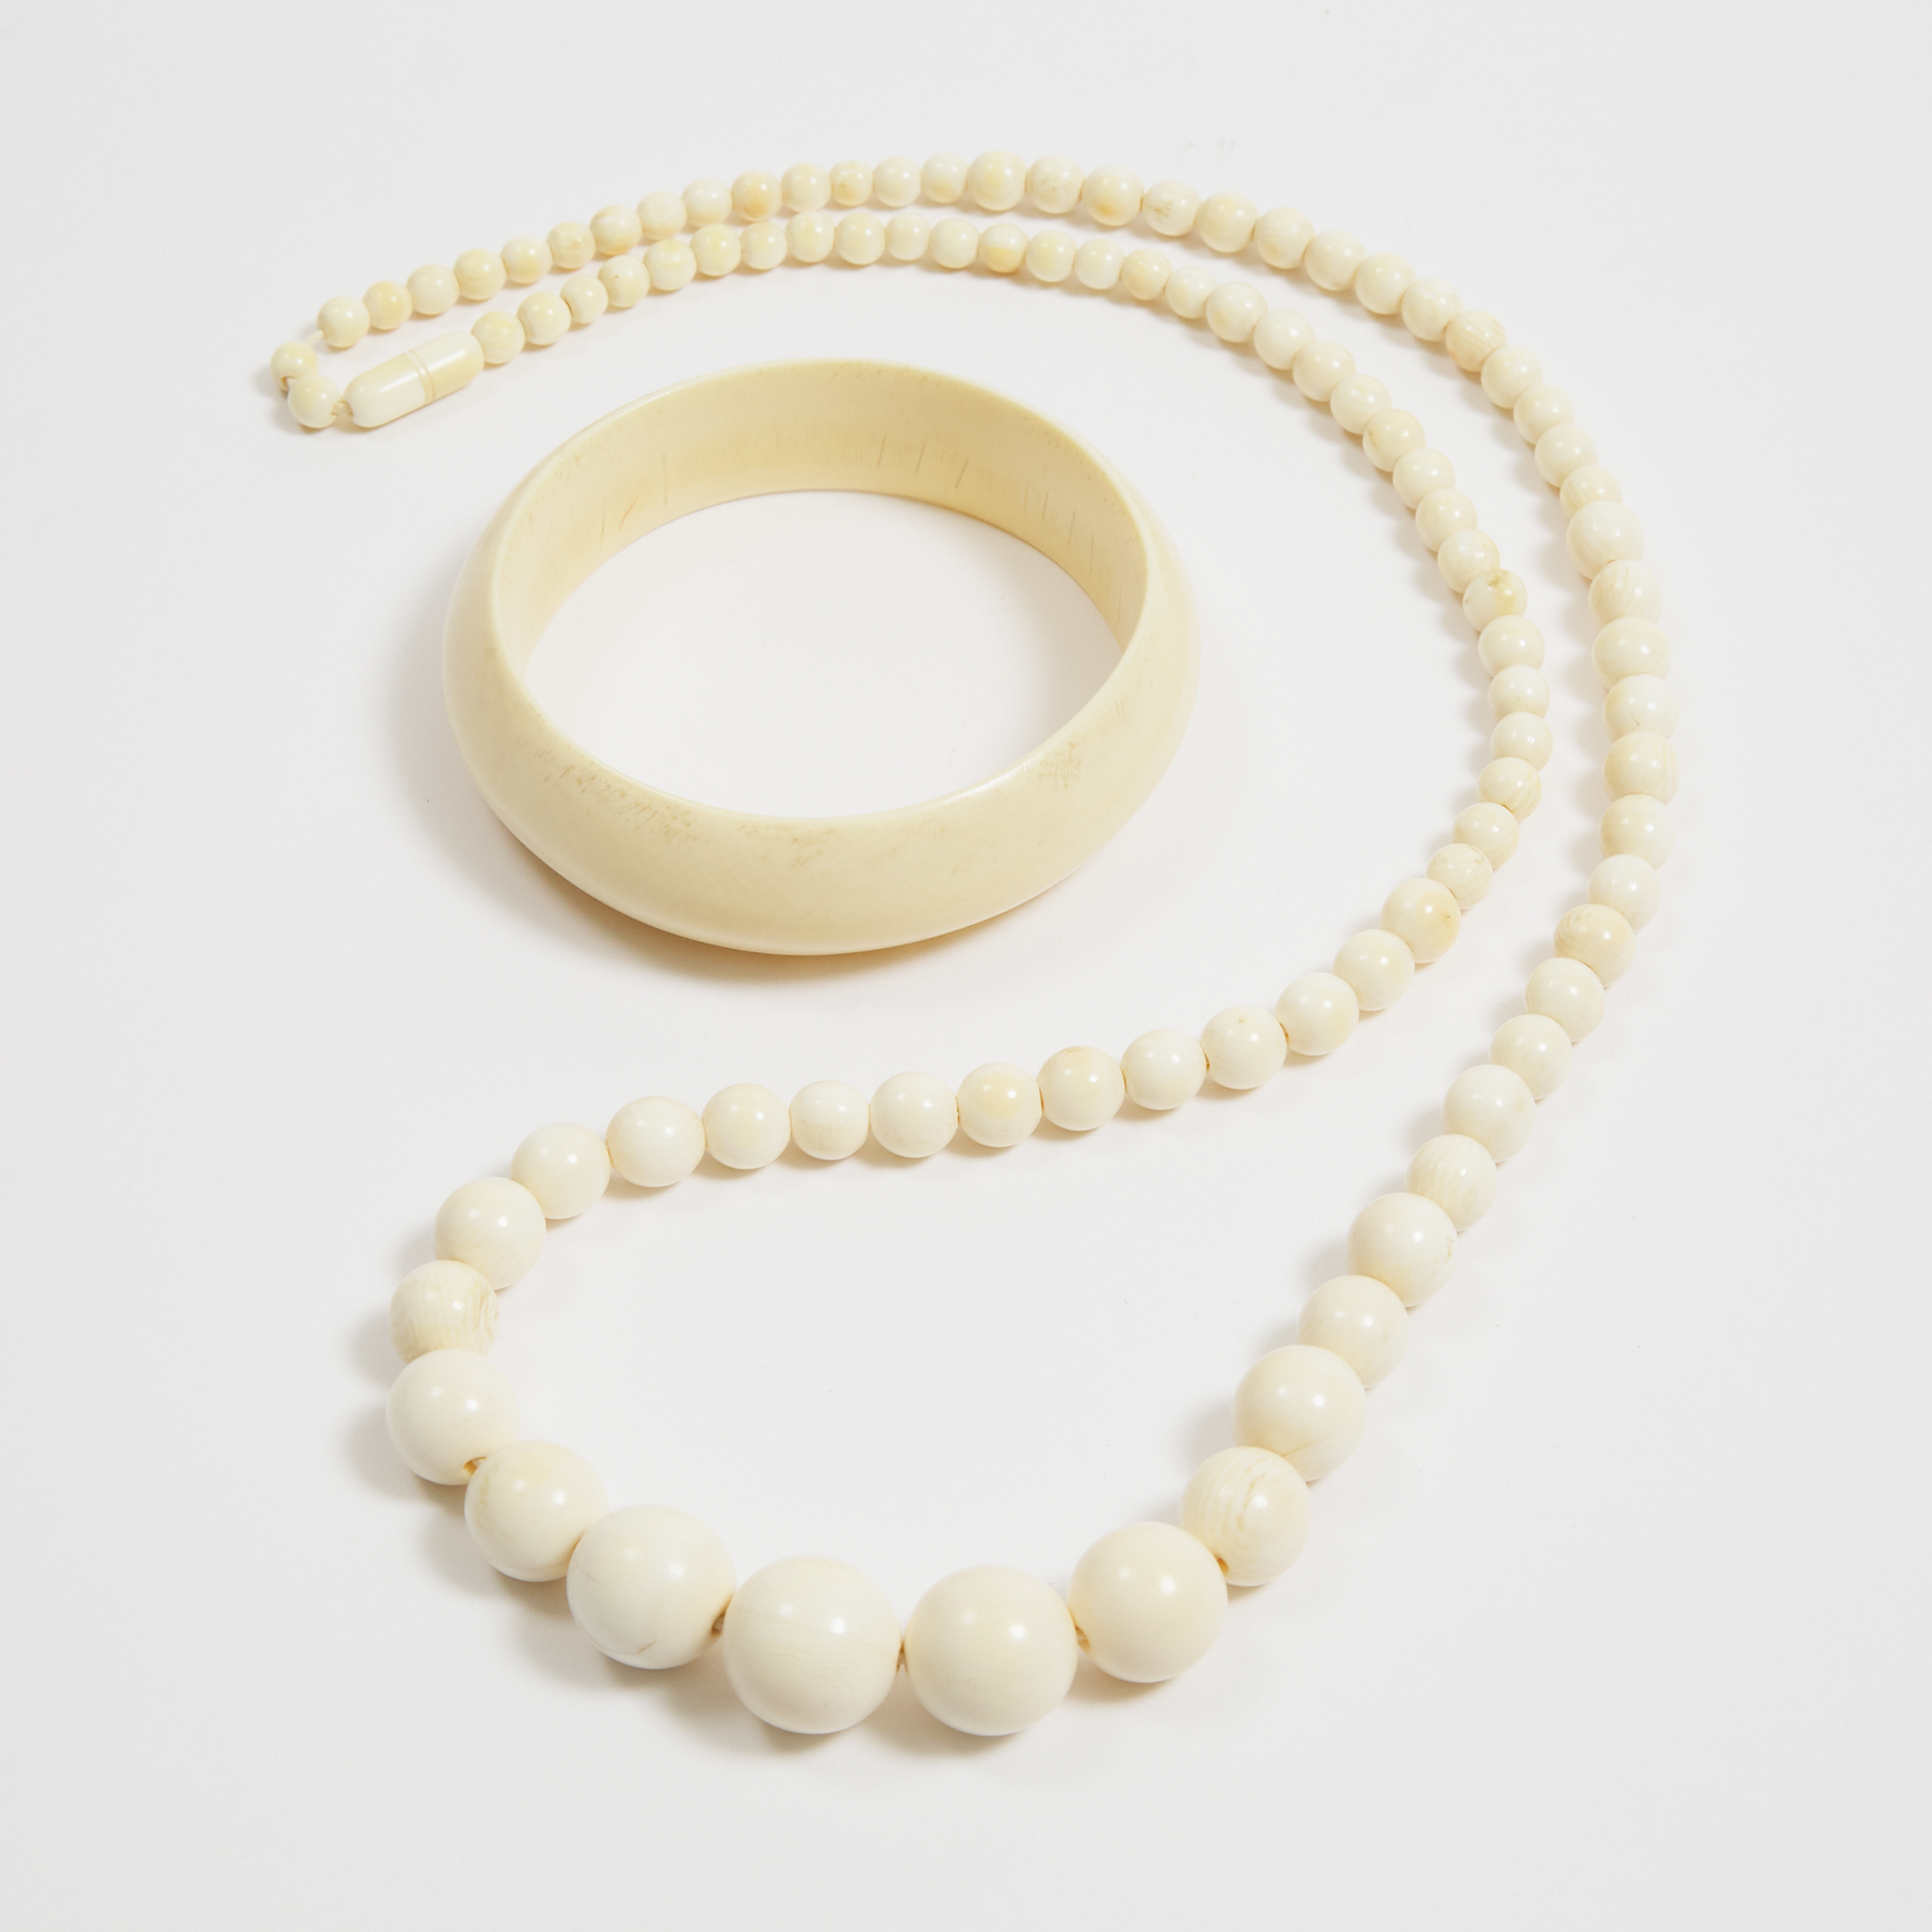 An Ivory Beaded Necklace and Bangle  3ab942